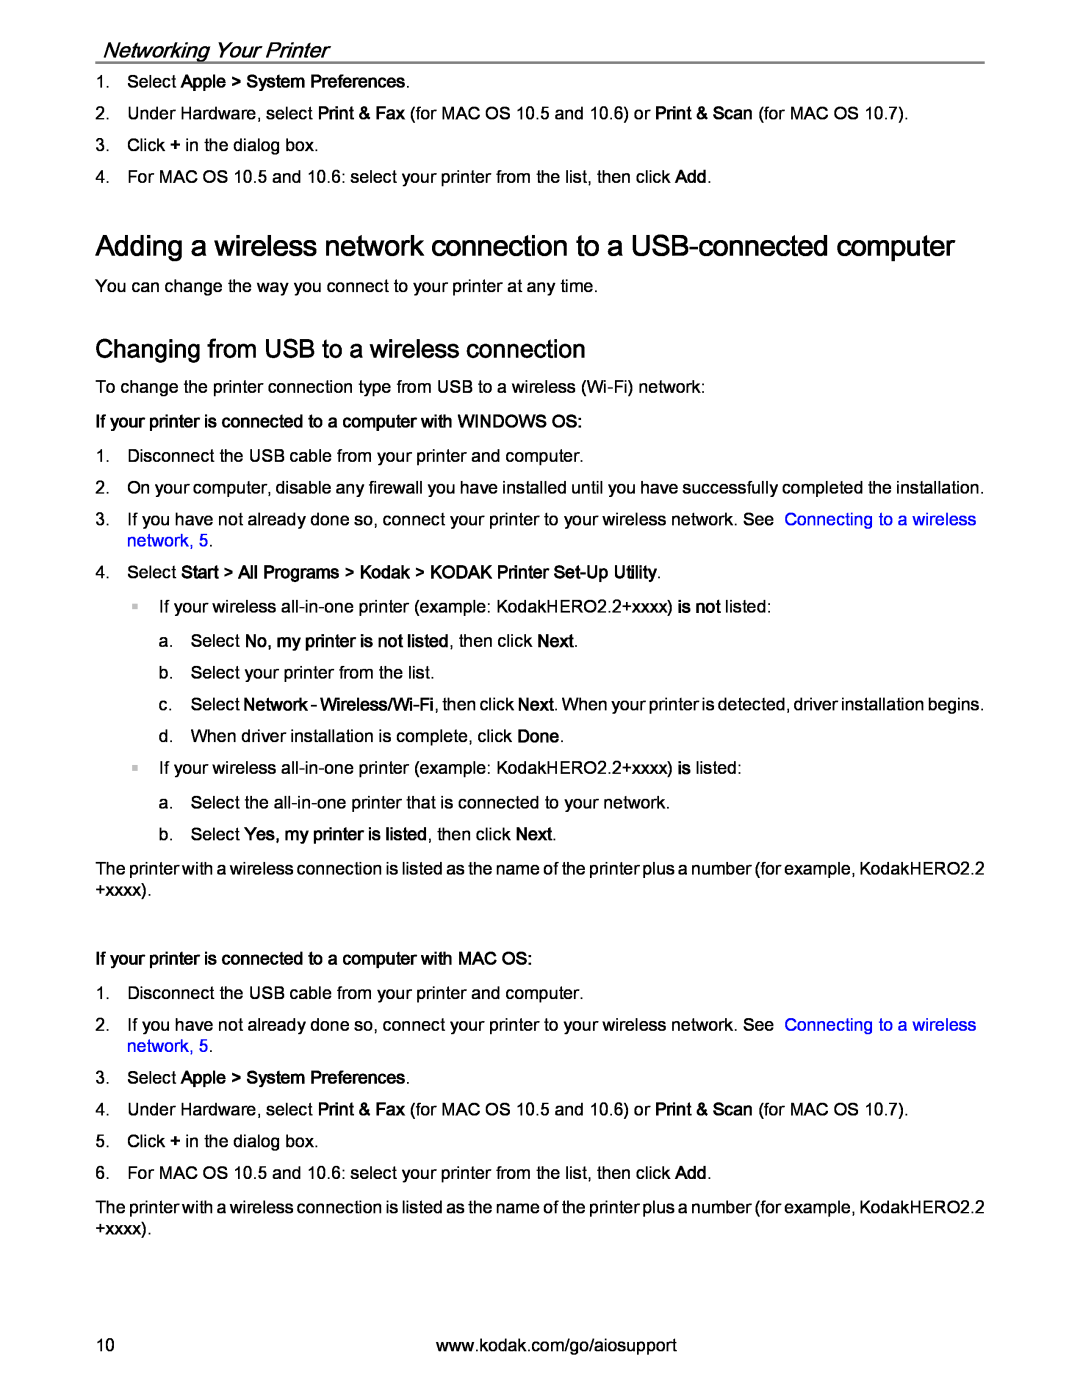 Kodak 2.2 Adding a wireless network connection to a USB-connected computer, Changing from USB to a wireless connection 